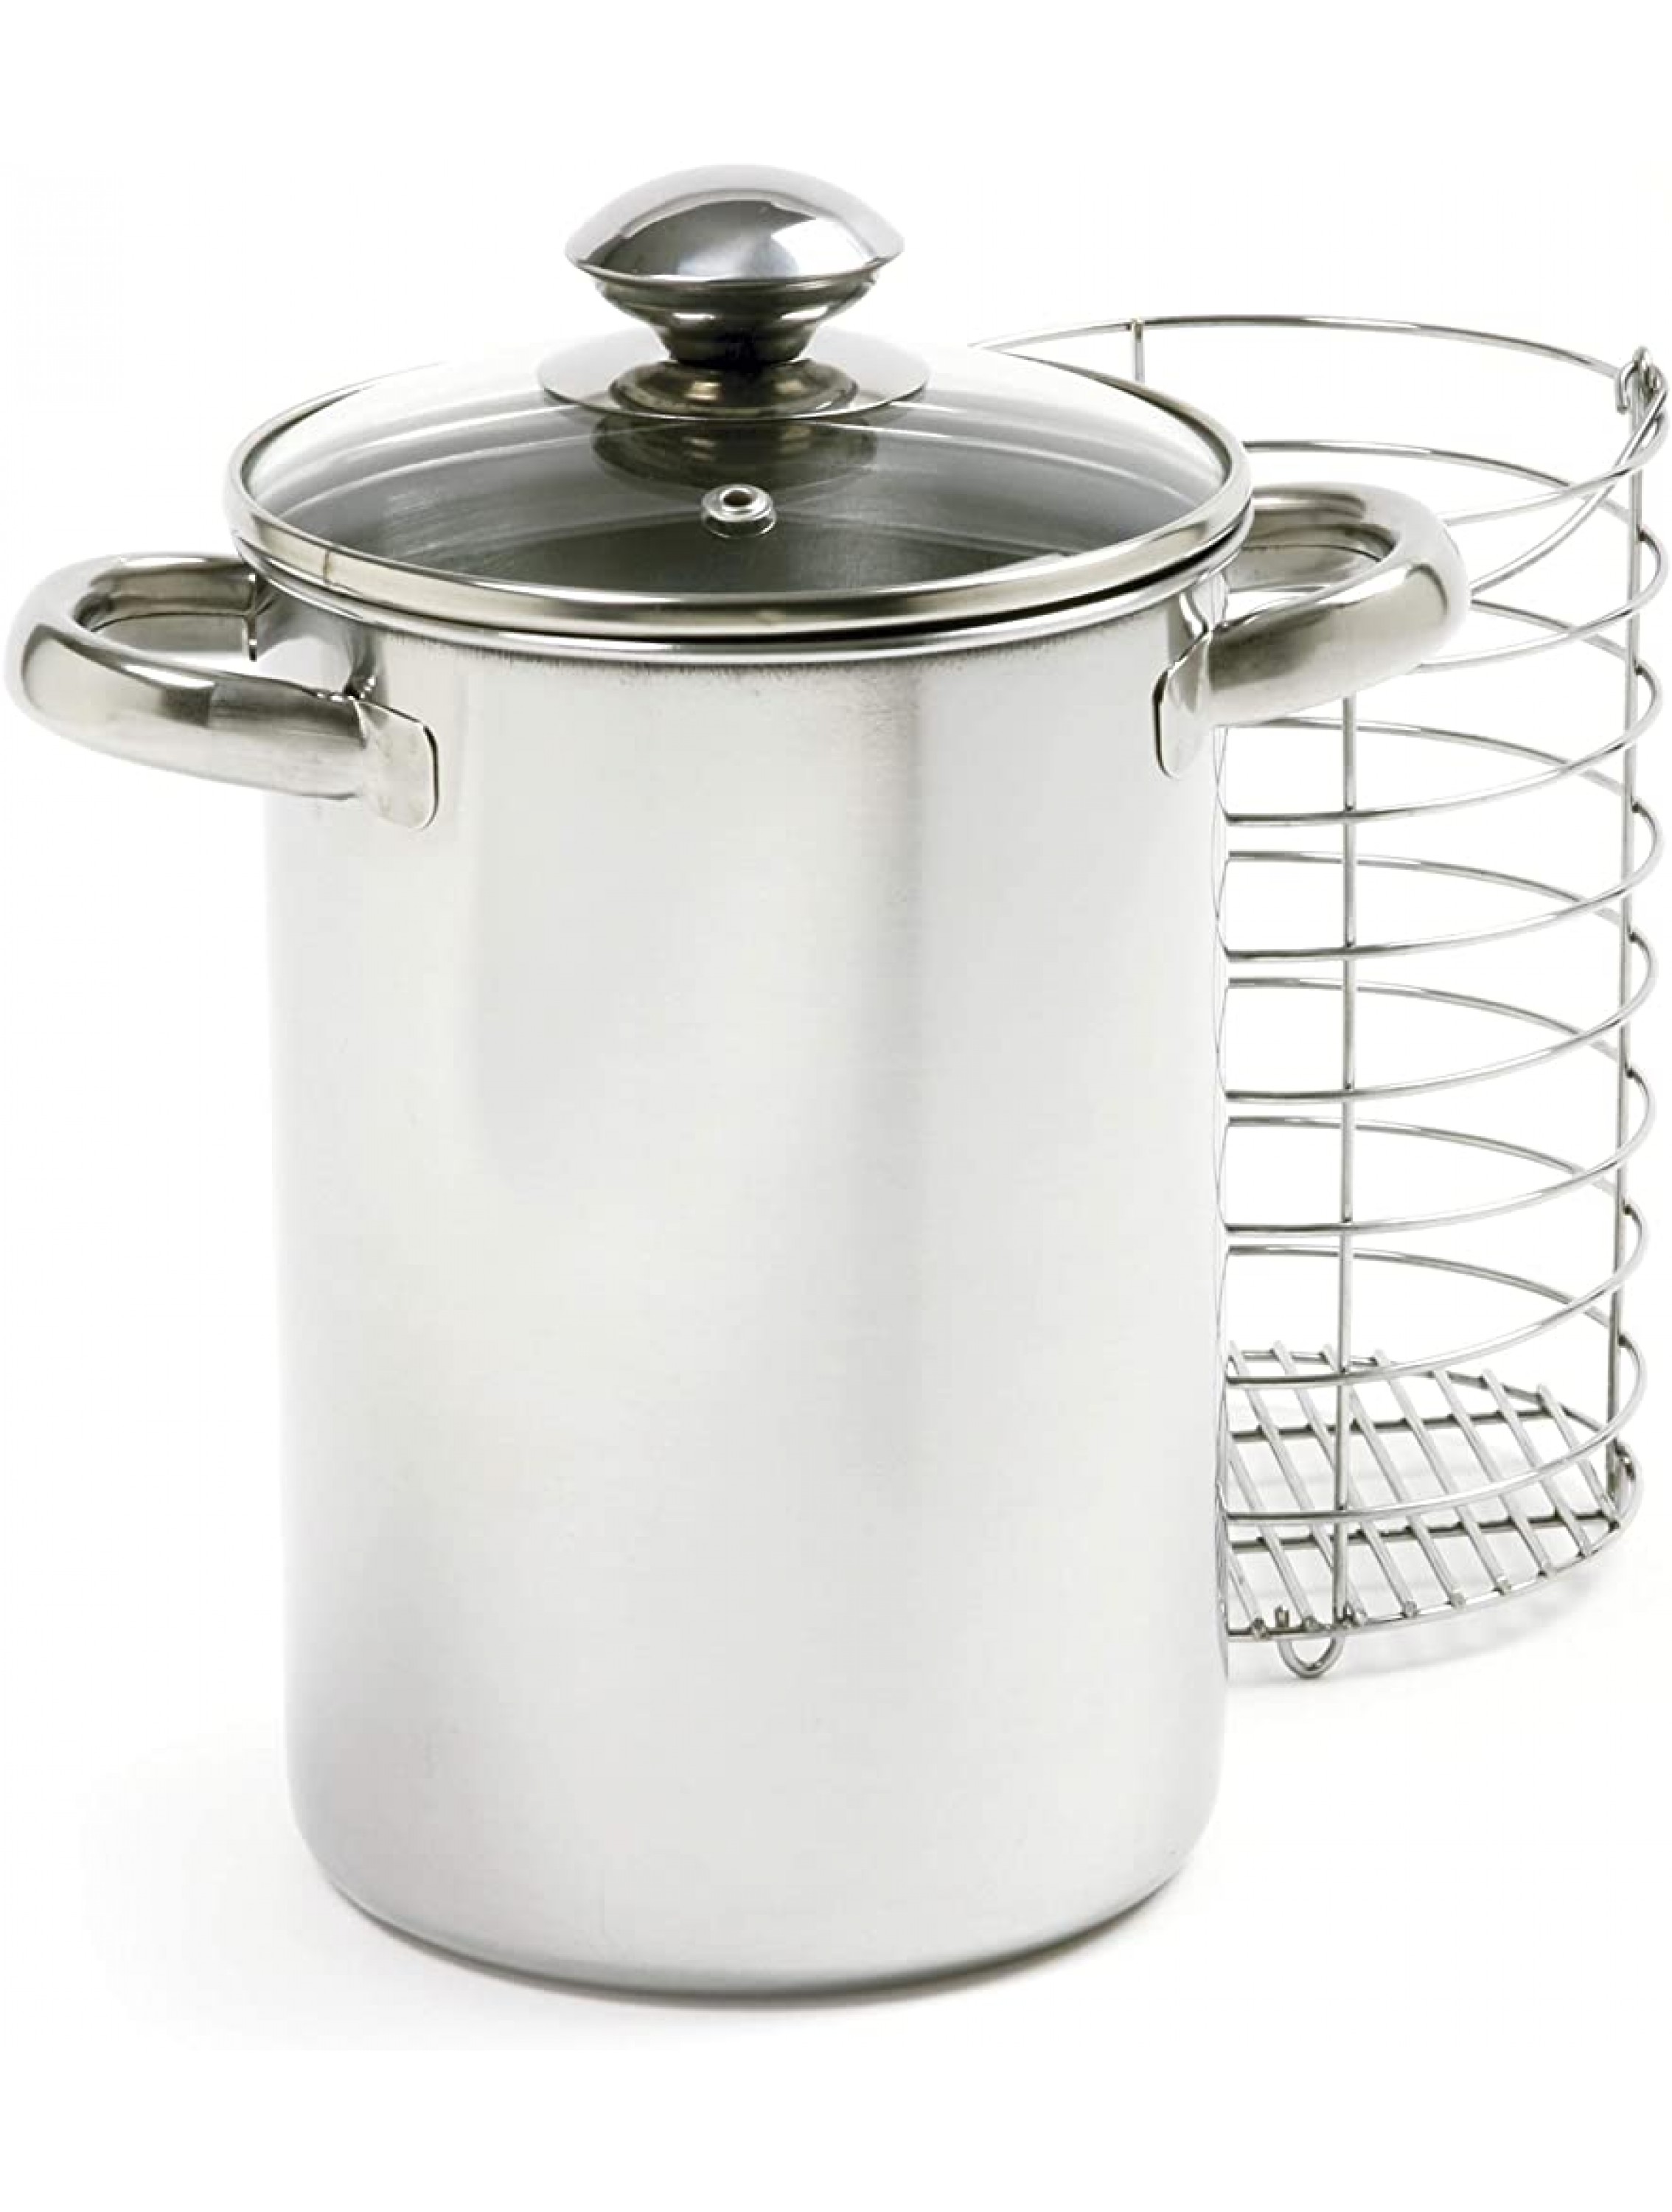 Norpro 573 Stainless Steel Vertical Cooker Steamer 3 Piece Set 10in 25.5cm as shown - BKBIES5BF